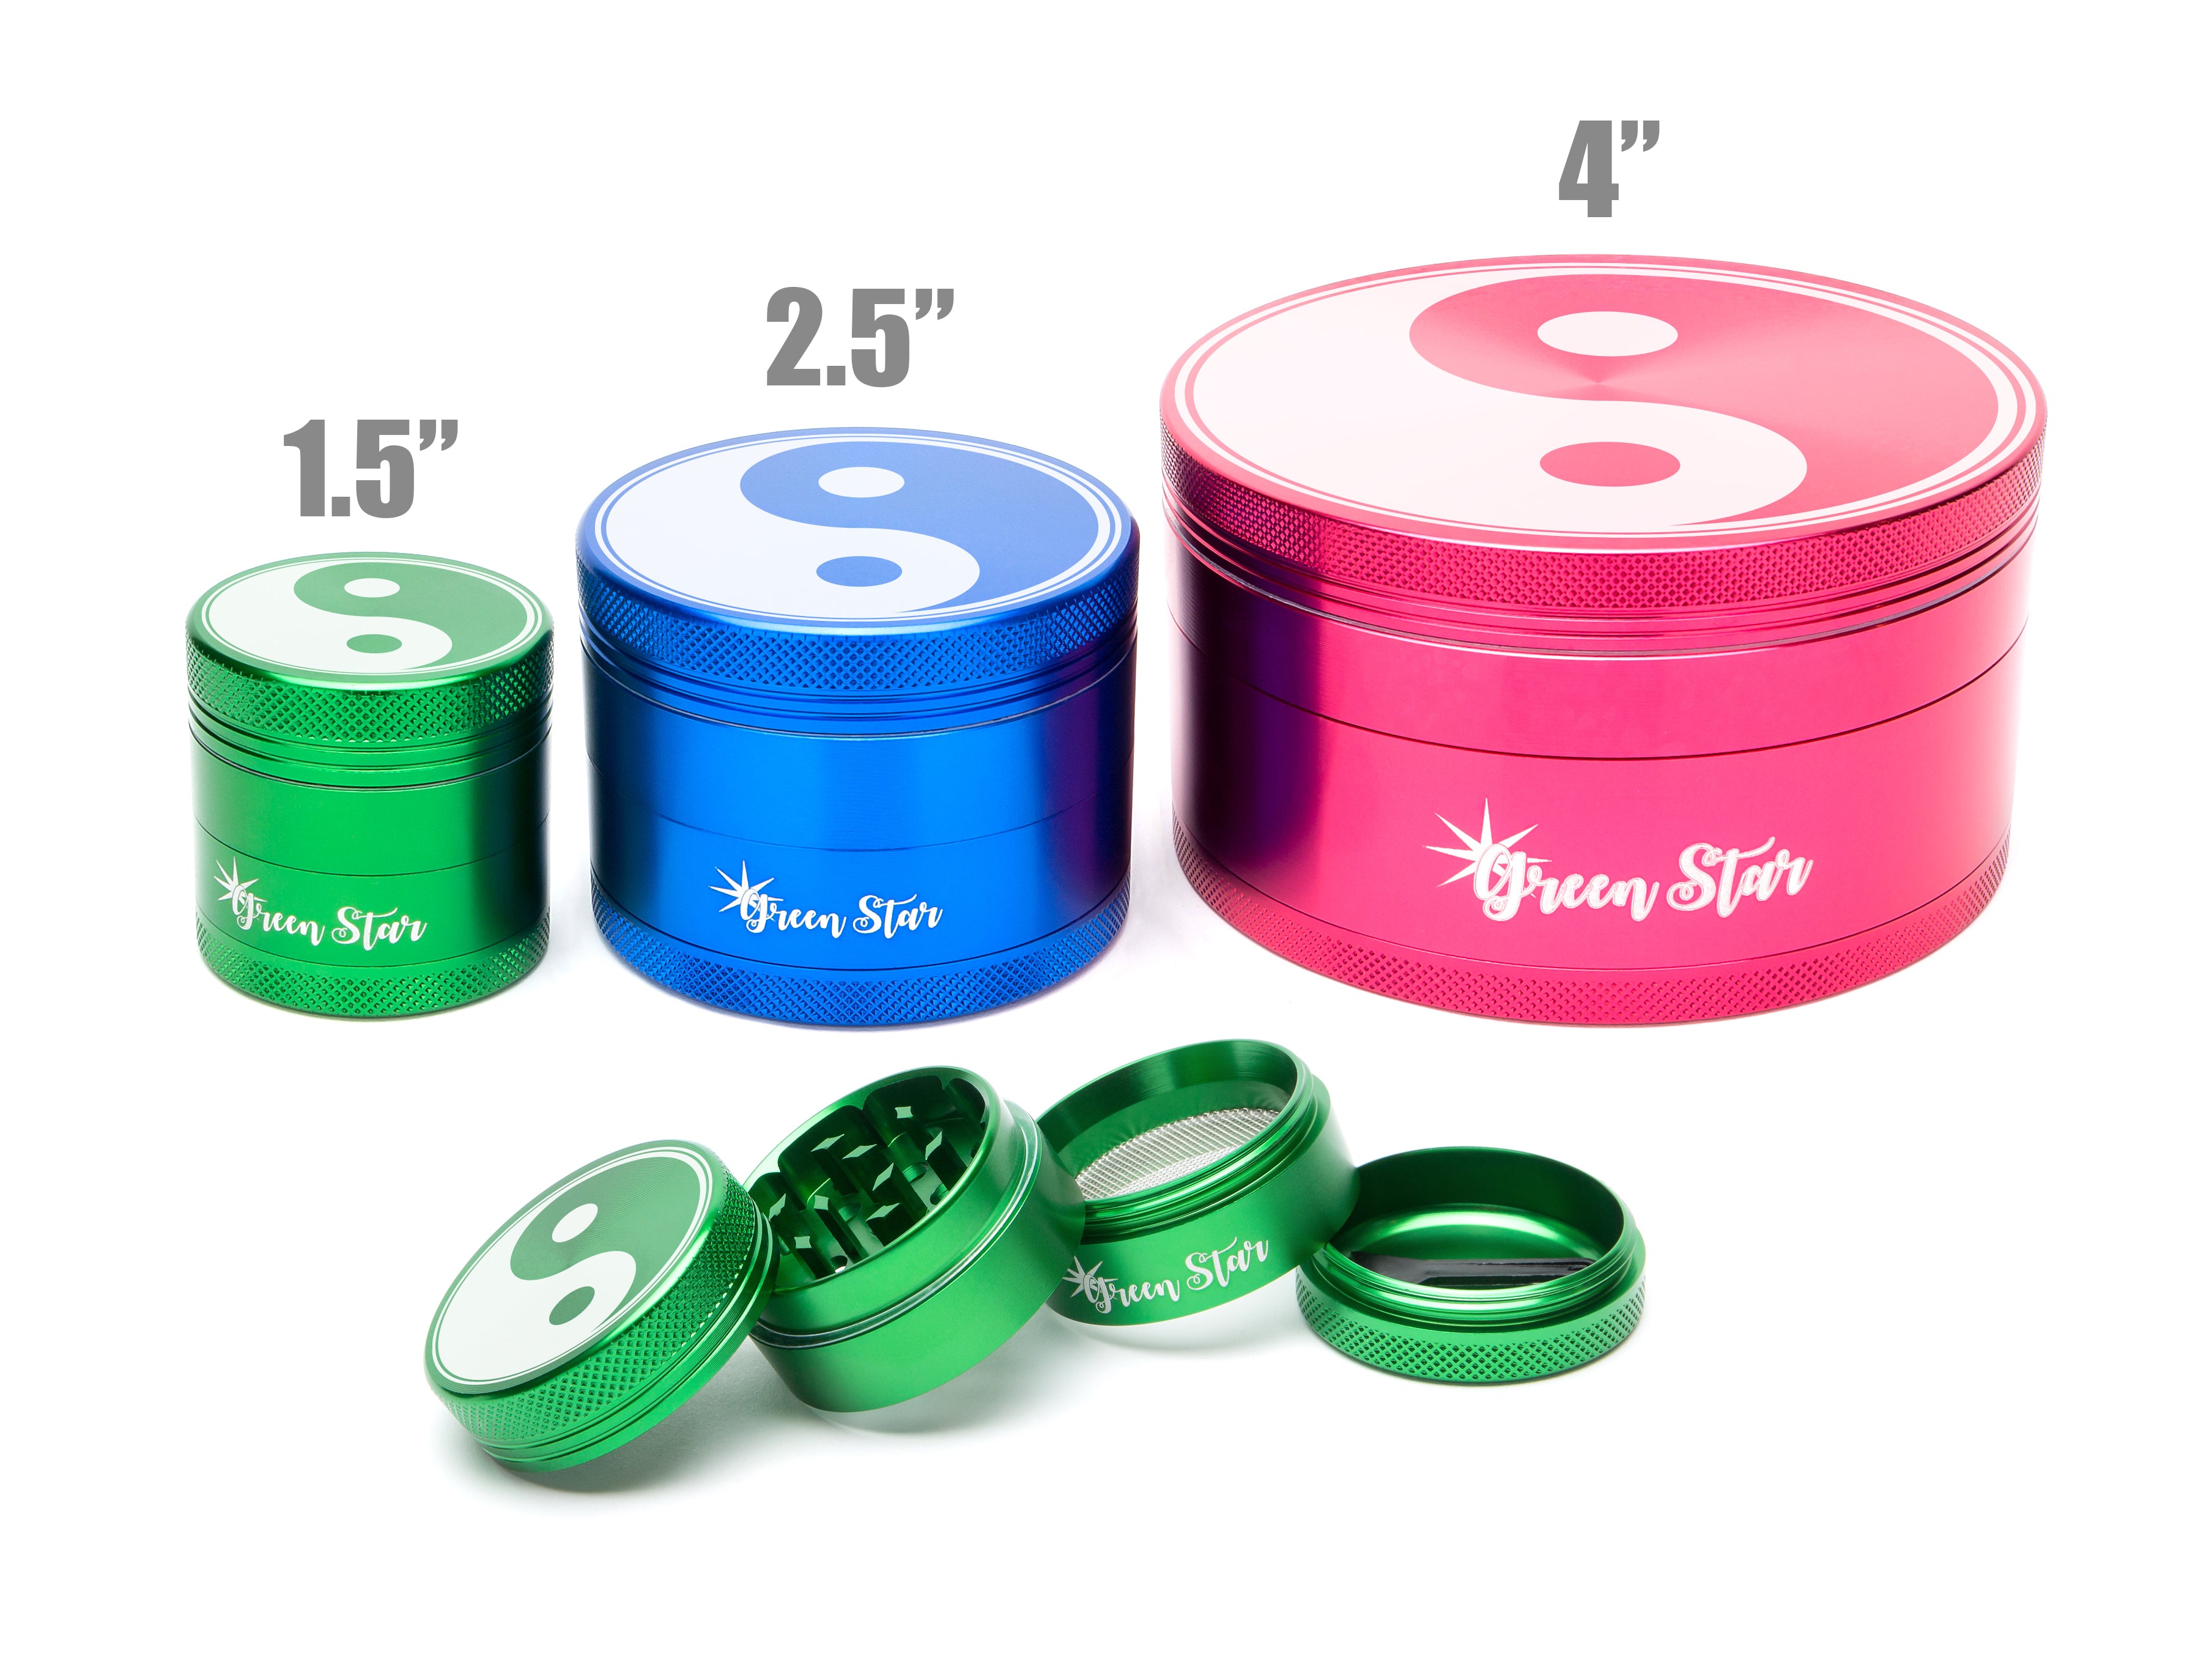 1.5" (40mm) 4-Piece Grinder with Yin Yang Design